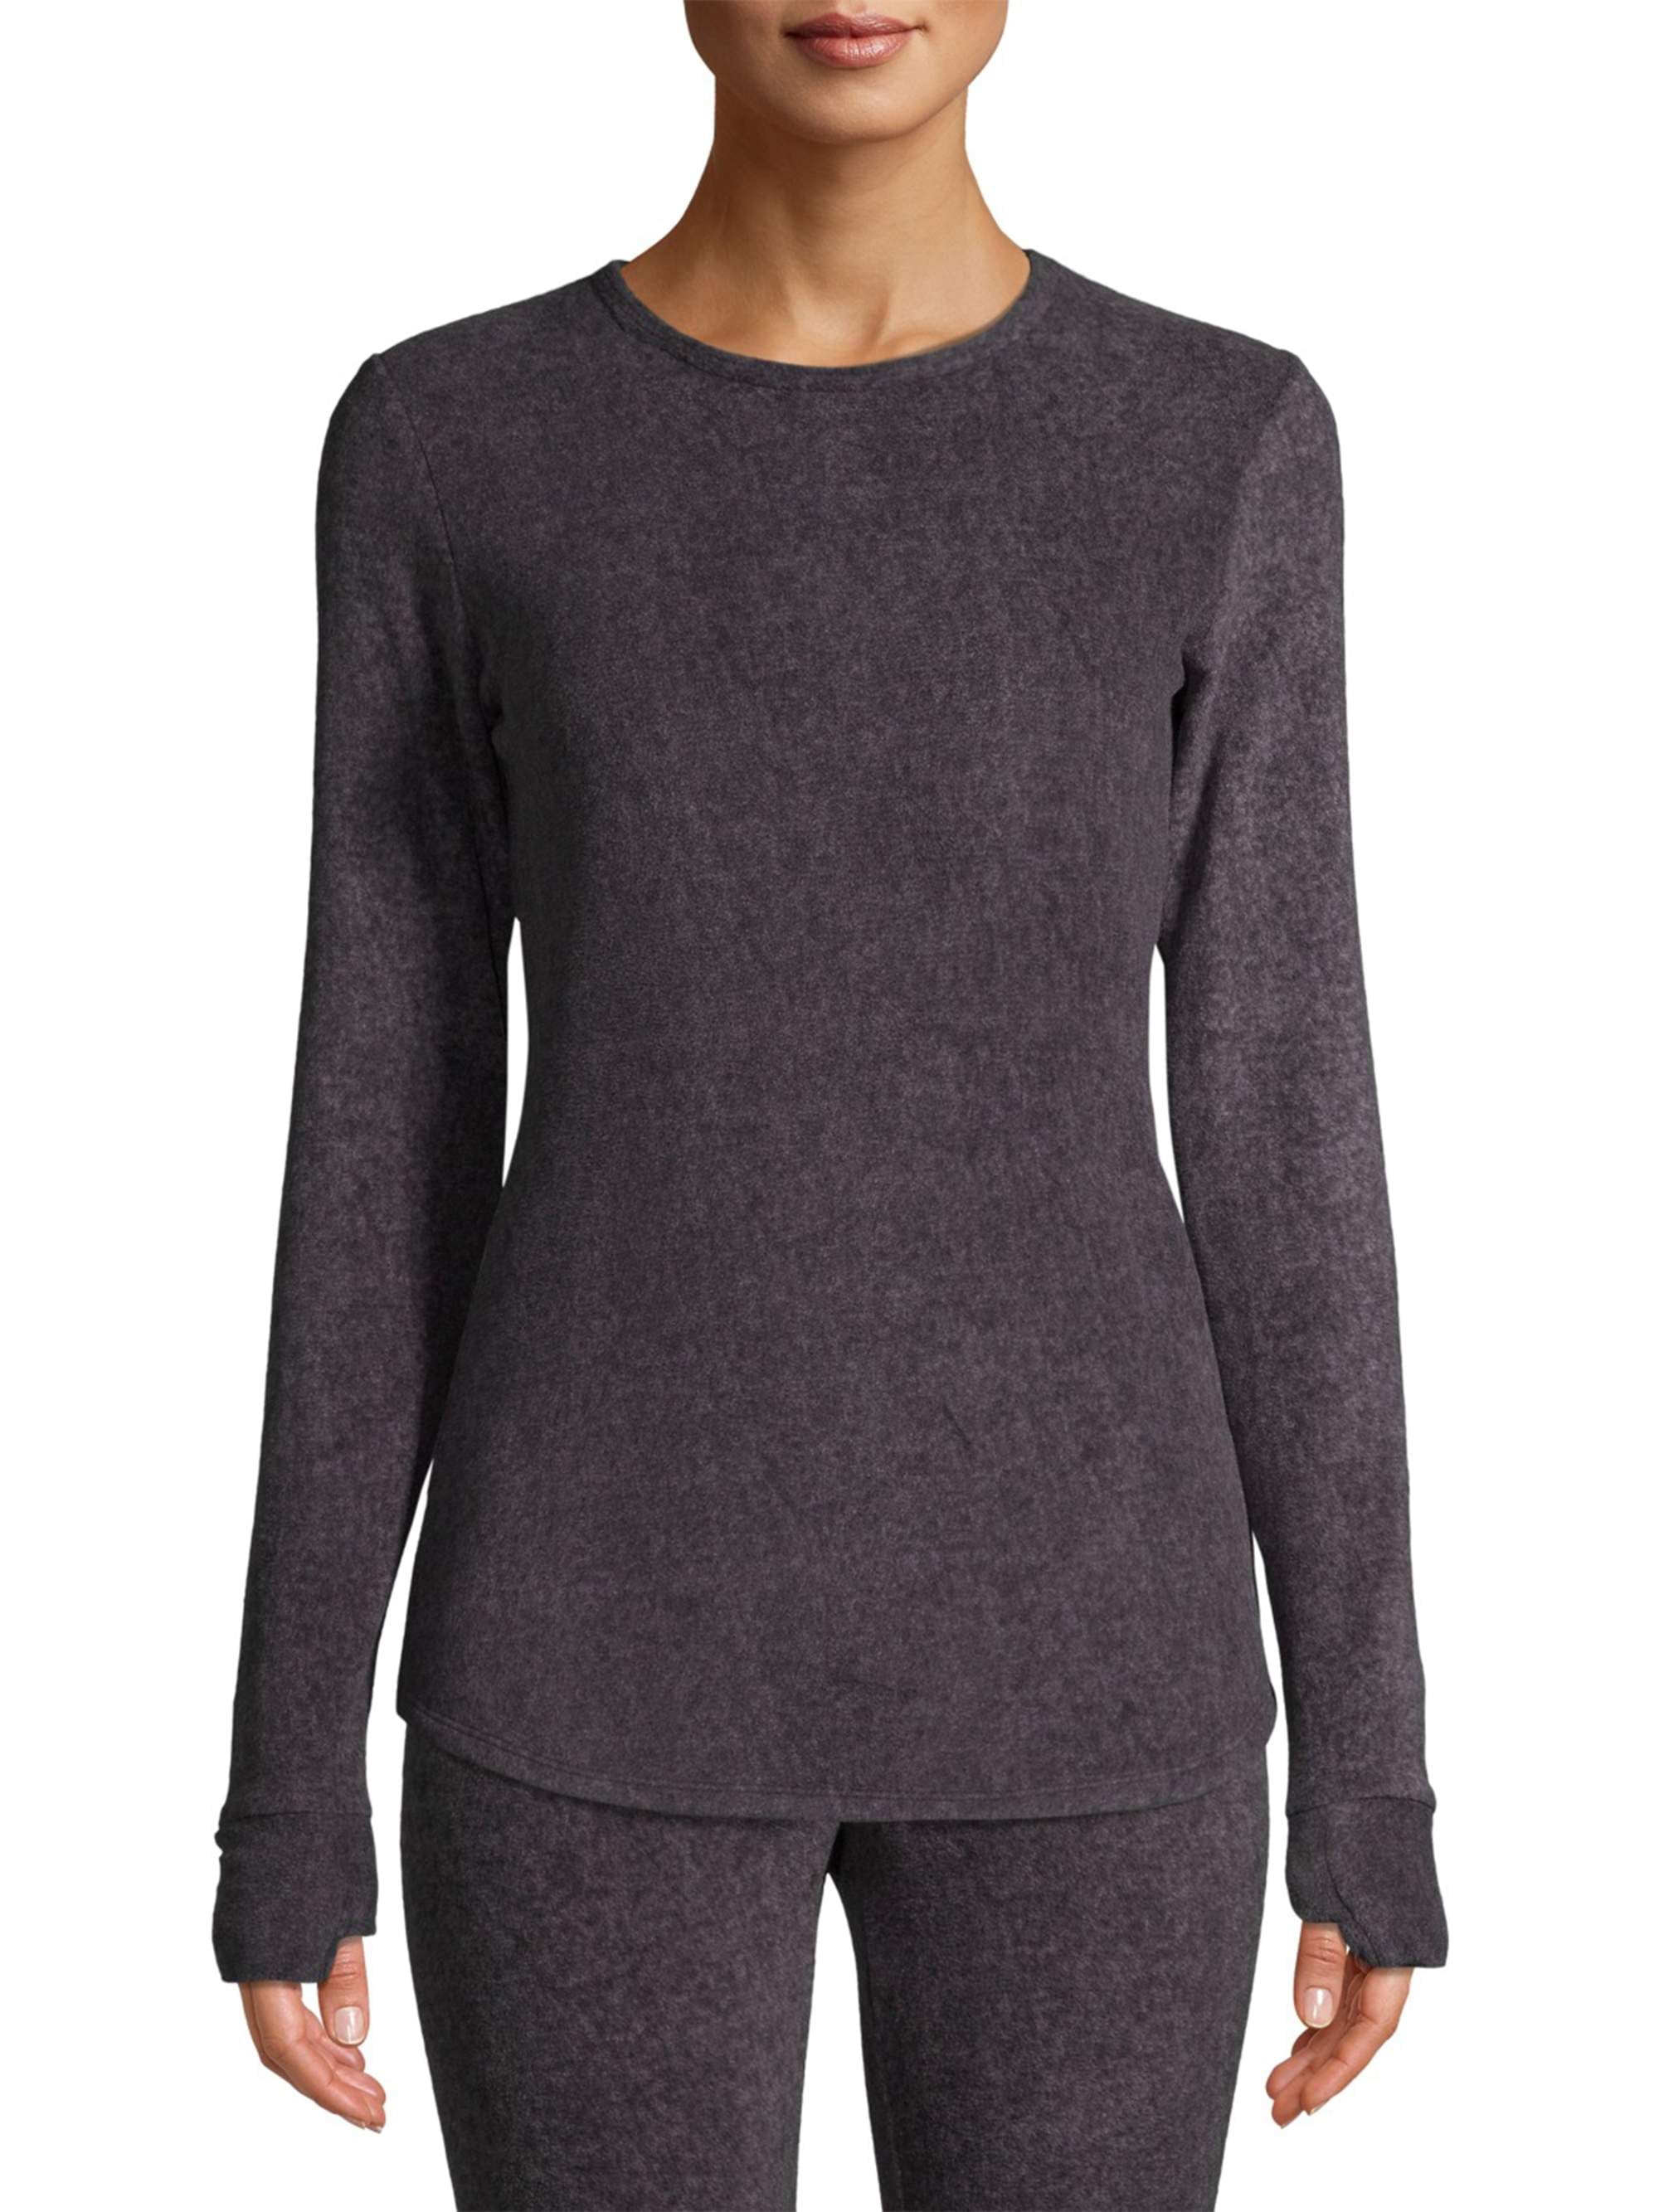 ClimateRight by Cuddl Duds Women's Stretch Fleece Long Sleeve Crew Neck Top  & Legging Base Layer Set, Sizes XS to 4XL